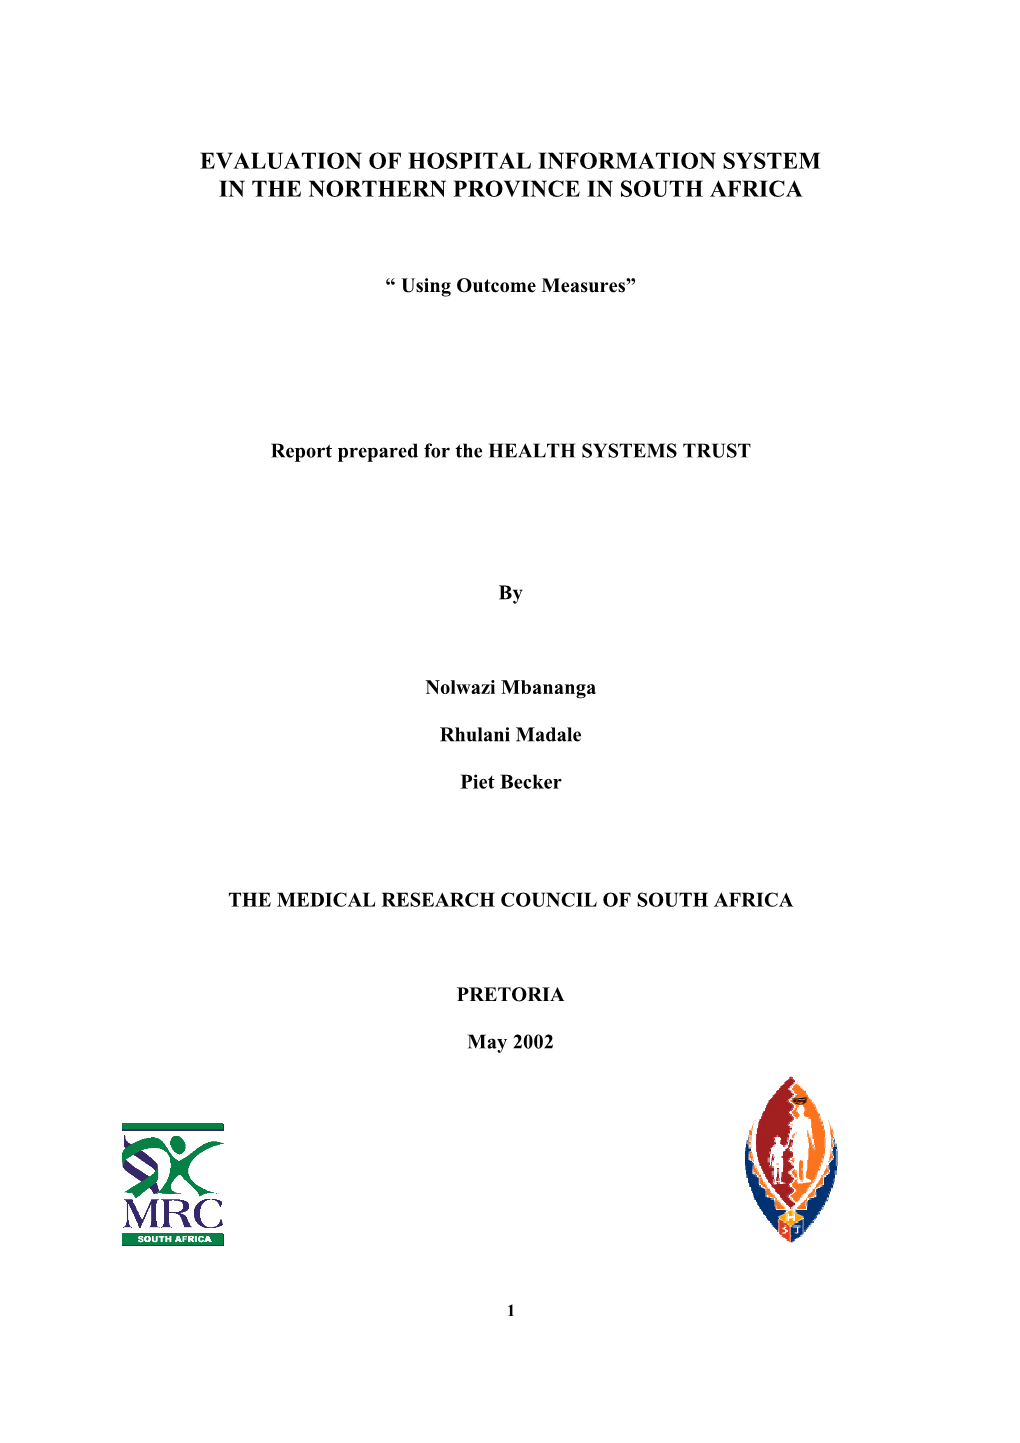 Evaluation of Hospital Information System in the Northern Province in South Africa